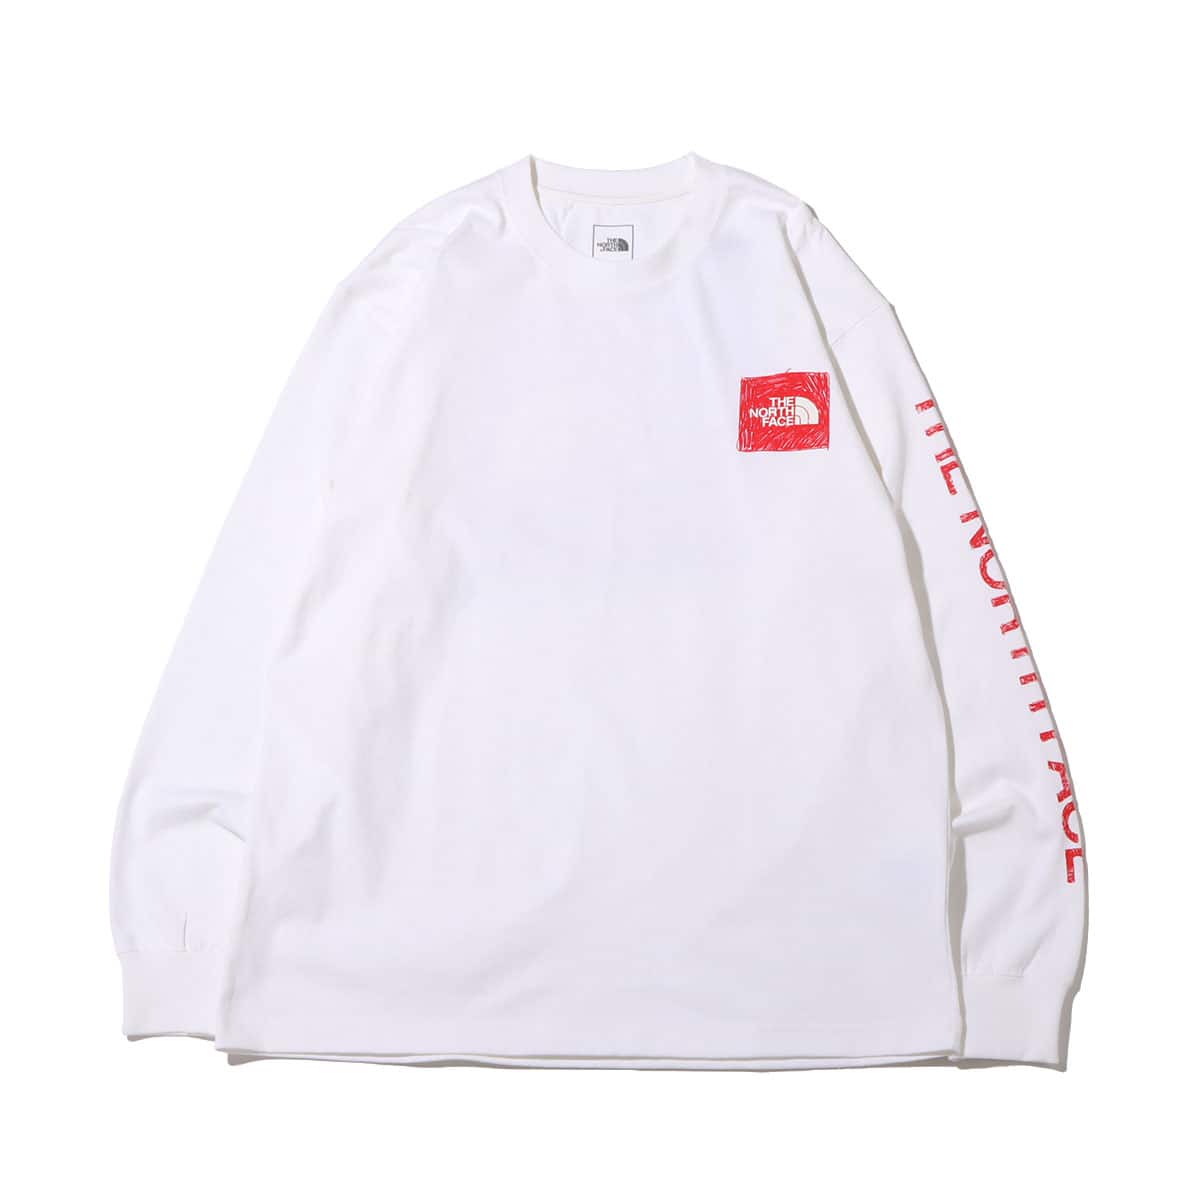 THE NORTH FACE L/S SLEEVE GRAPHIC TEE WHITE 22SS-I